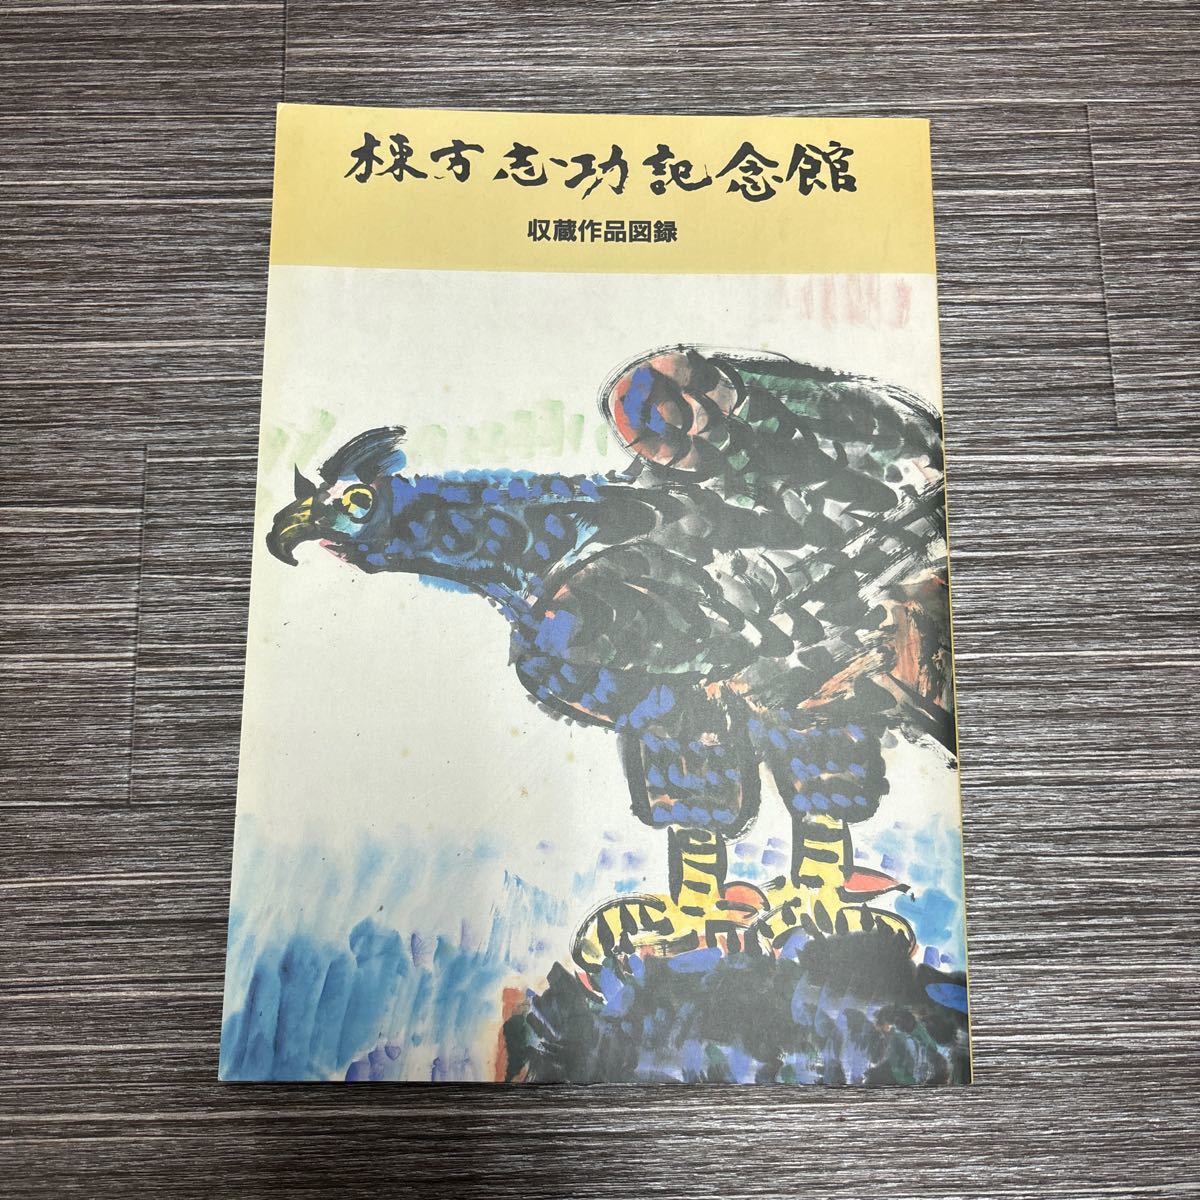 ●Munakata Shiko Memorial Museum Collection Catalog●Painting/Art Book/Art/Artistic/Artwork Collection/Primary Color/Monochrome/Illustration/Words/Portrait/Print/Japanese Painting/Buddhism ★374, Painting, Art Book, Collection, Catalog